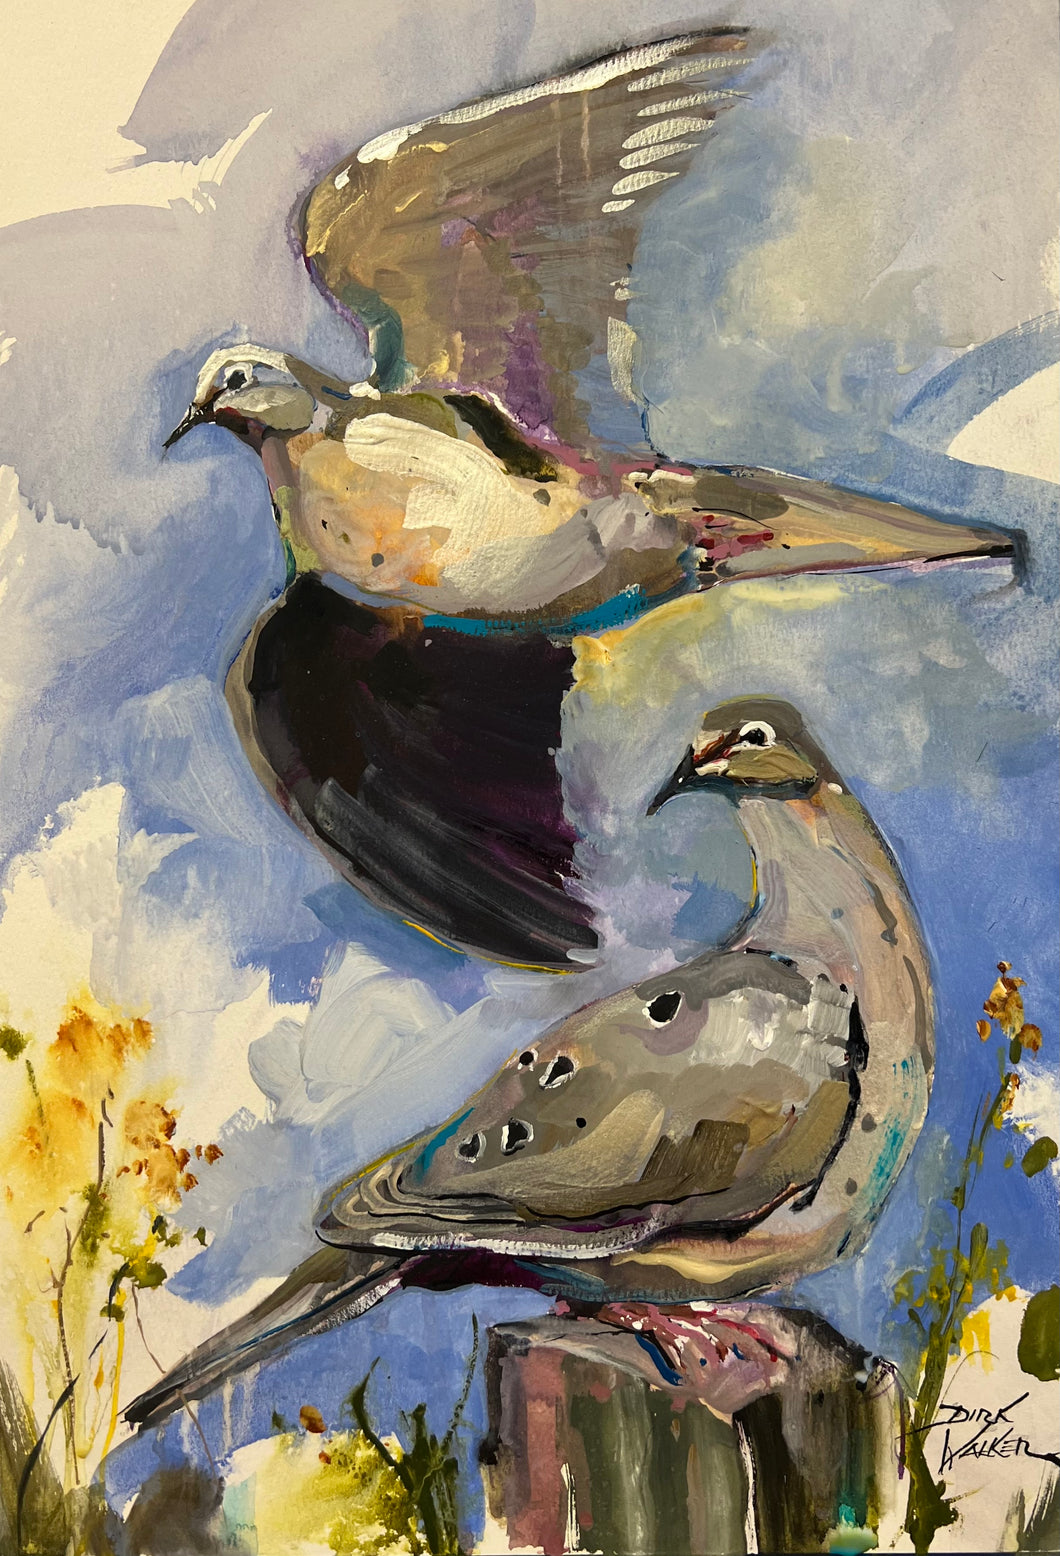 PAIR OF MOURNING DOVES by Artist Dirk Walker